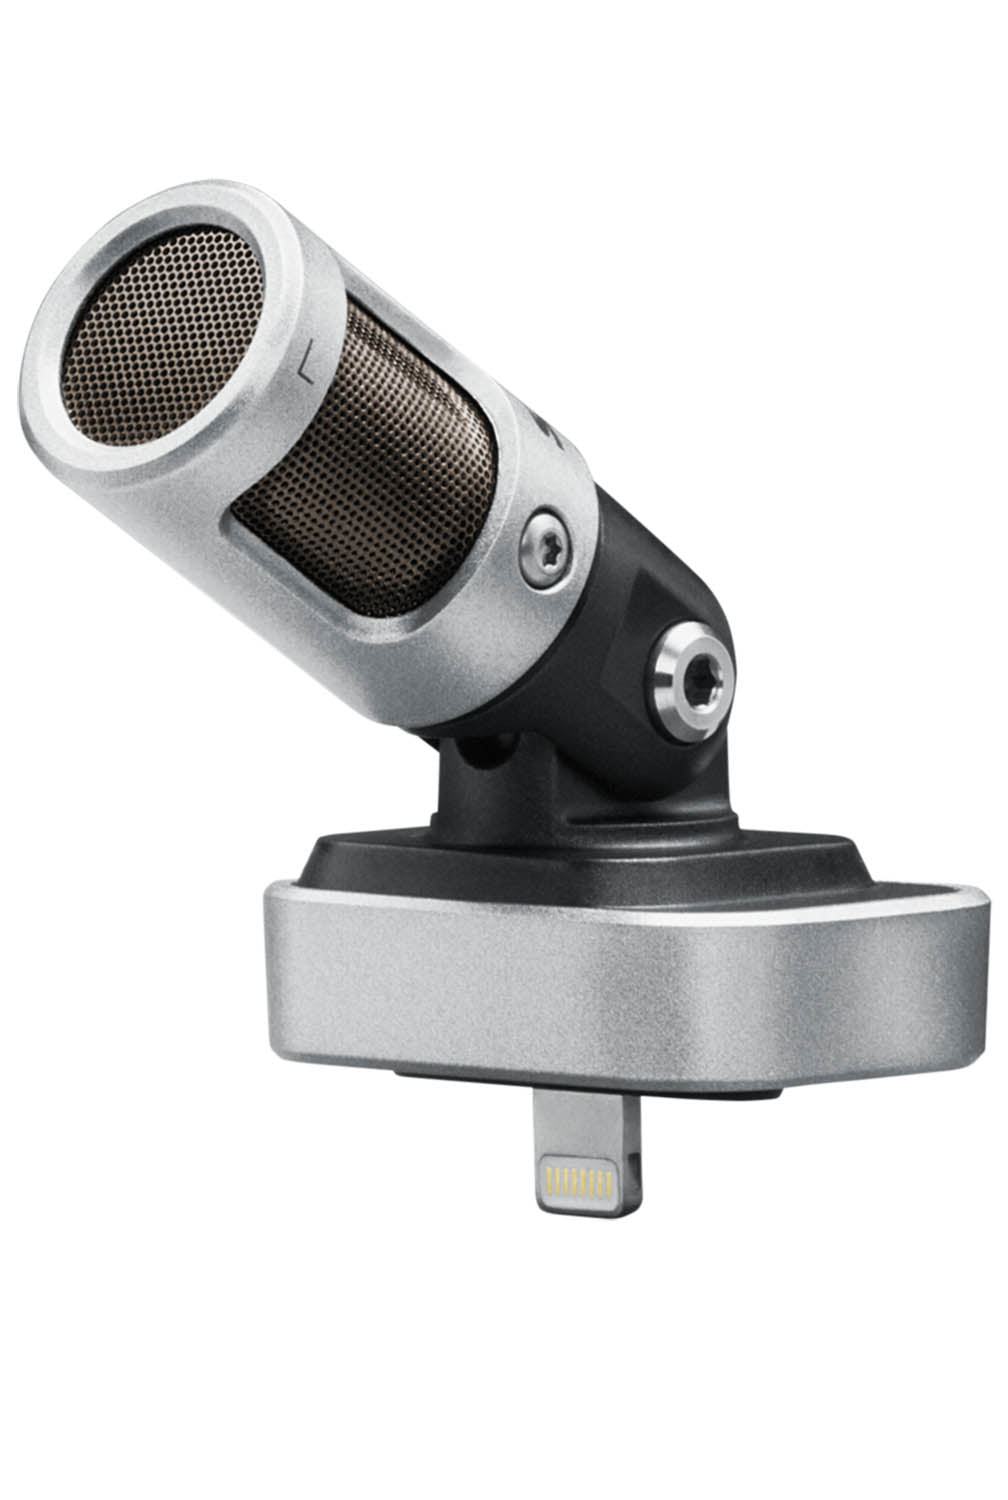 Shure MV88 iOS Digital Stereo Condenser Microphone With Lightning Connector - Hollywood DJ